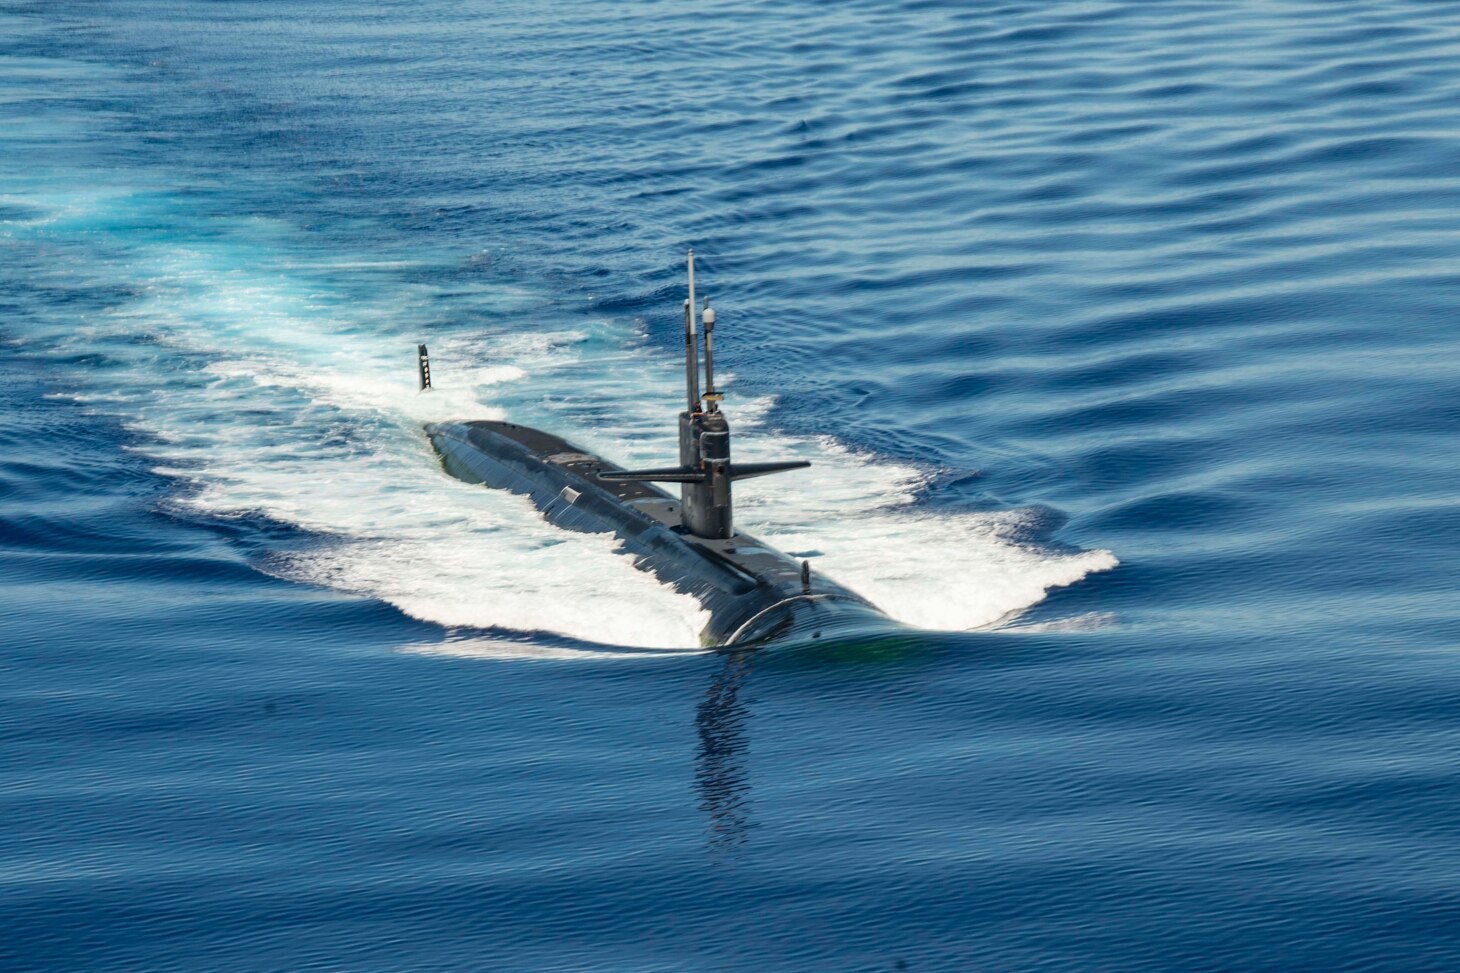 The Los Angeles-class submarine USS Chicago (SSN 721) steams in formation with the aircraft carrier USS Ronald Reagan (CVN 76), in support of Valiant Shield 2020.